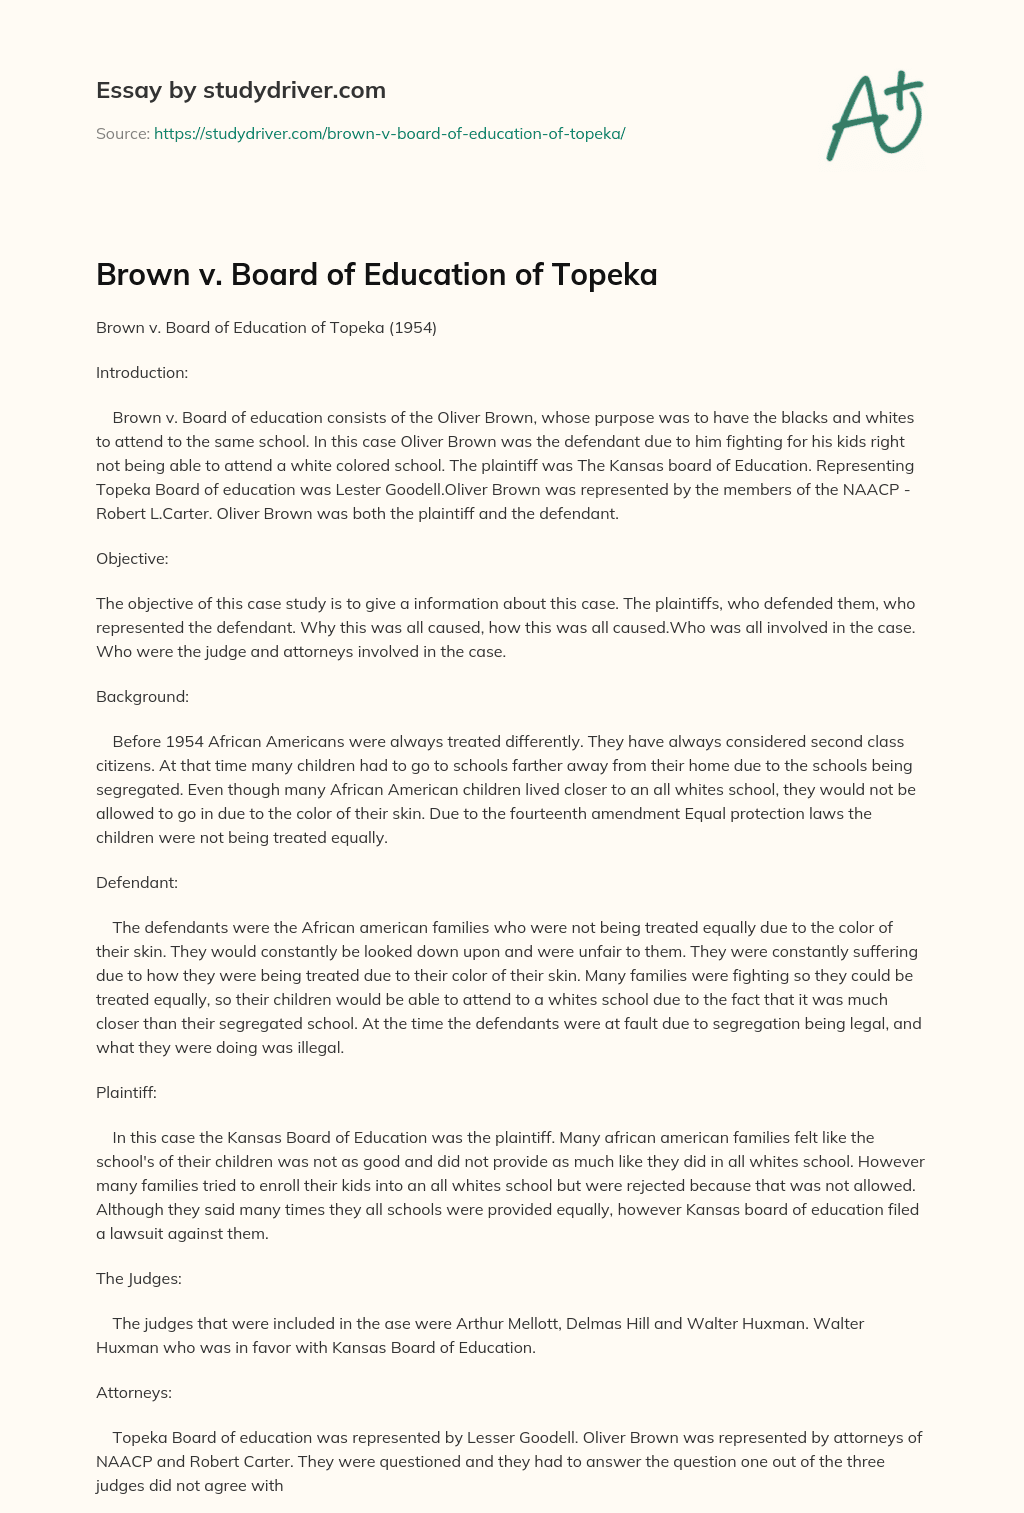 Brown V. Board of Education of Topeka essay